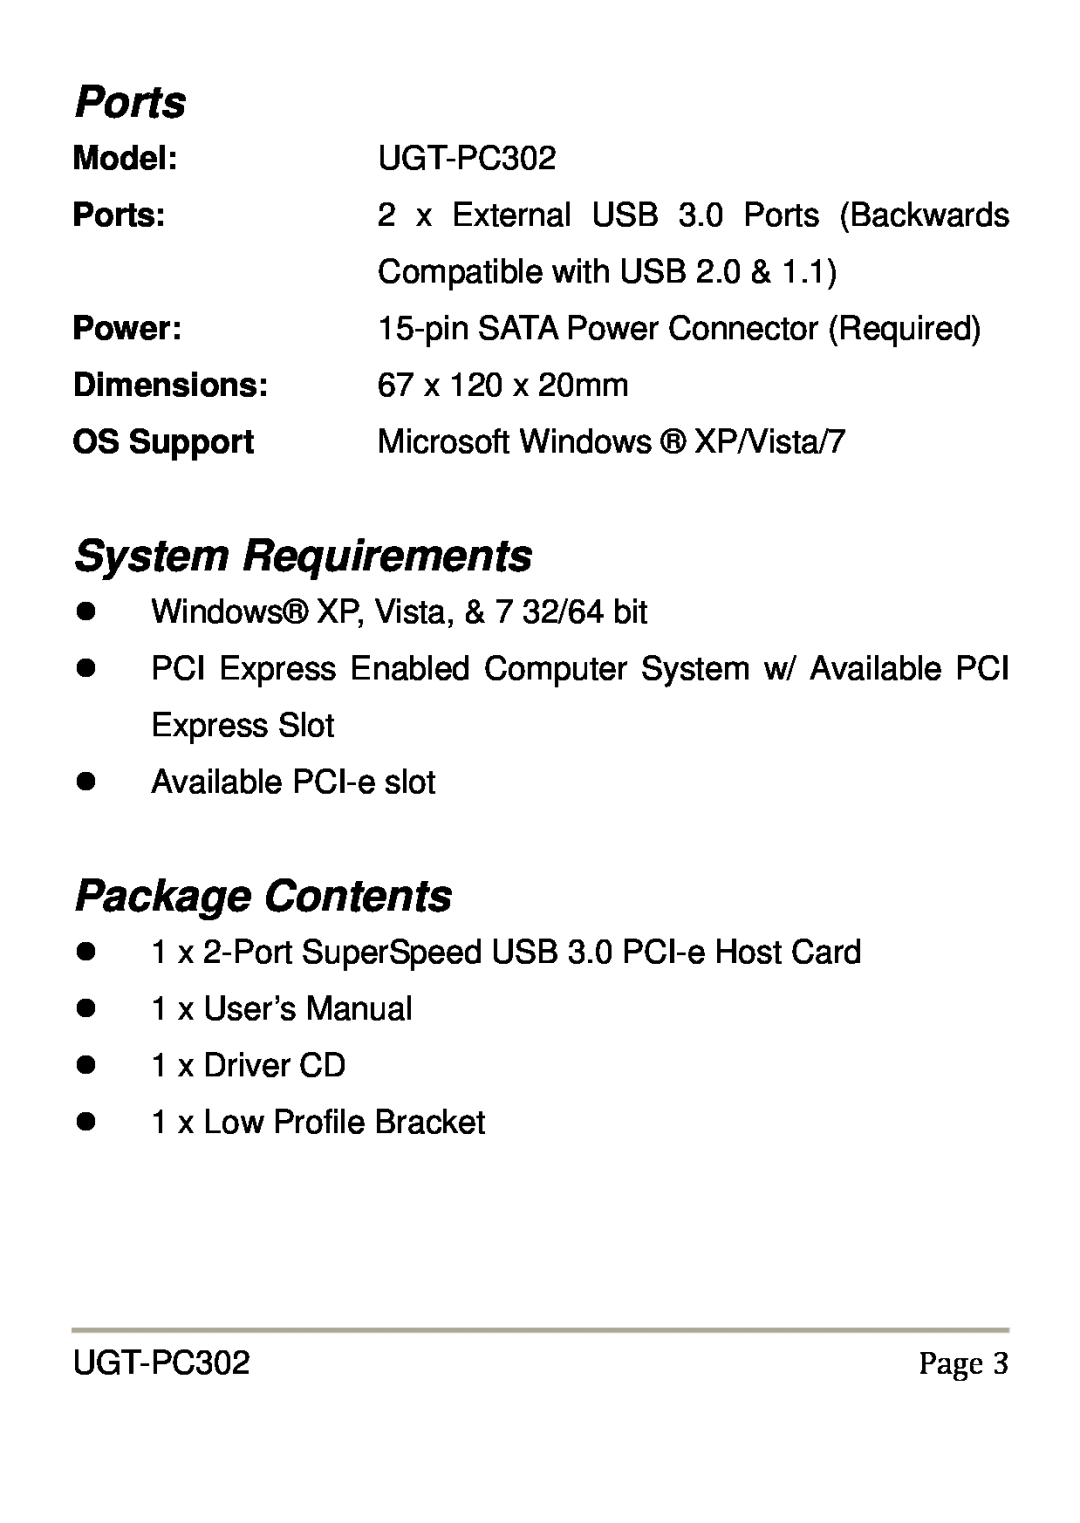 Vantec UGT-PC302 user manual Ports, System Requirements, Package Contents, Model, Power, Dimensions, OS Support 